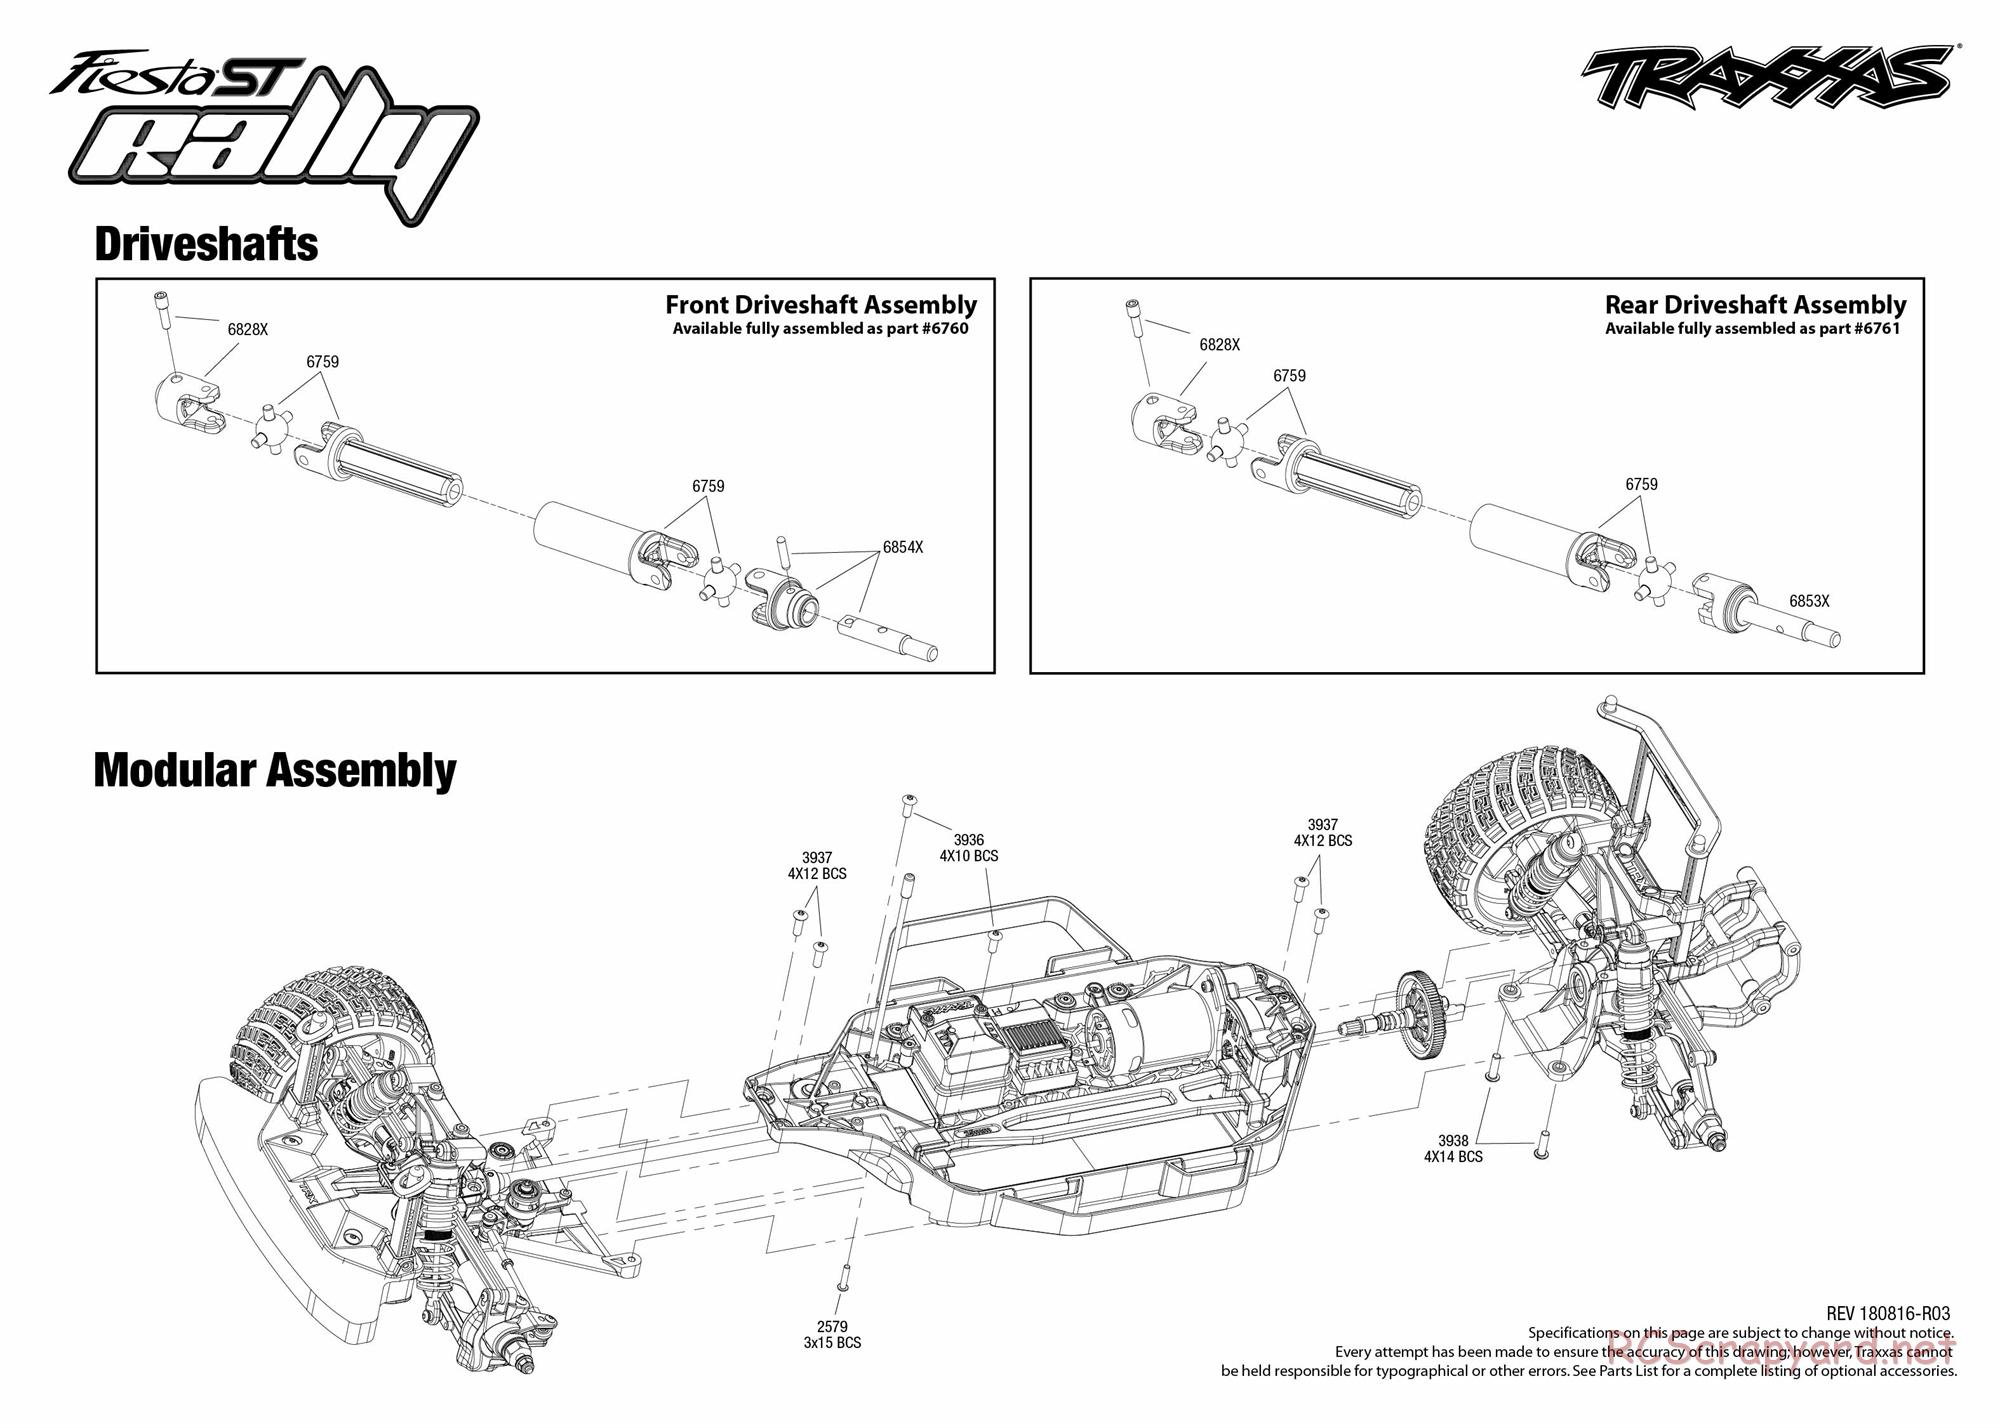 Traxxas - Ford Fiesta ST - NOS Deegan 38 Rally - Exploded Views - Page 2